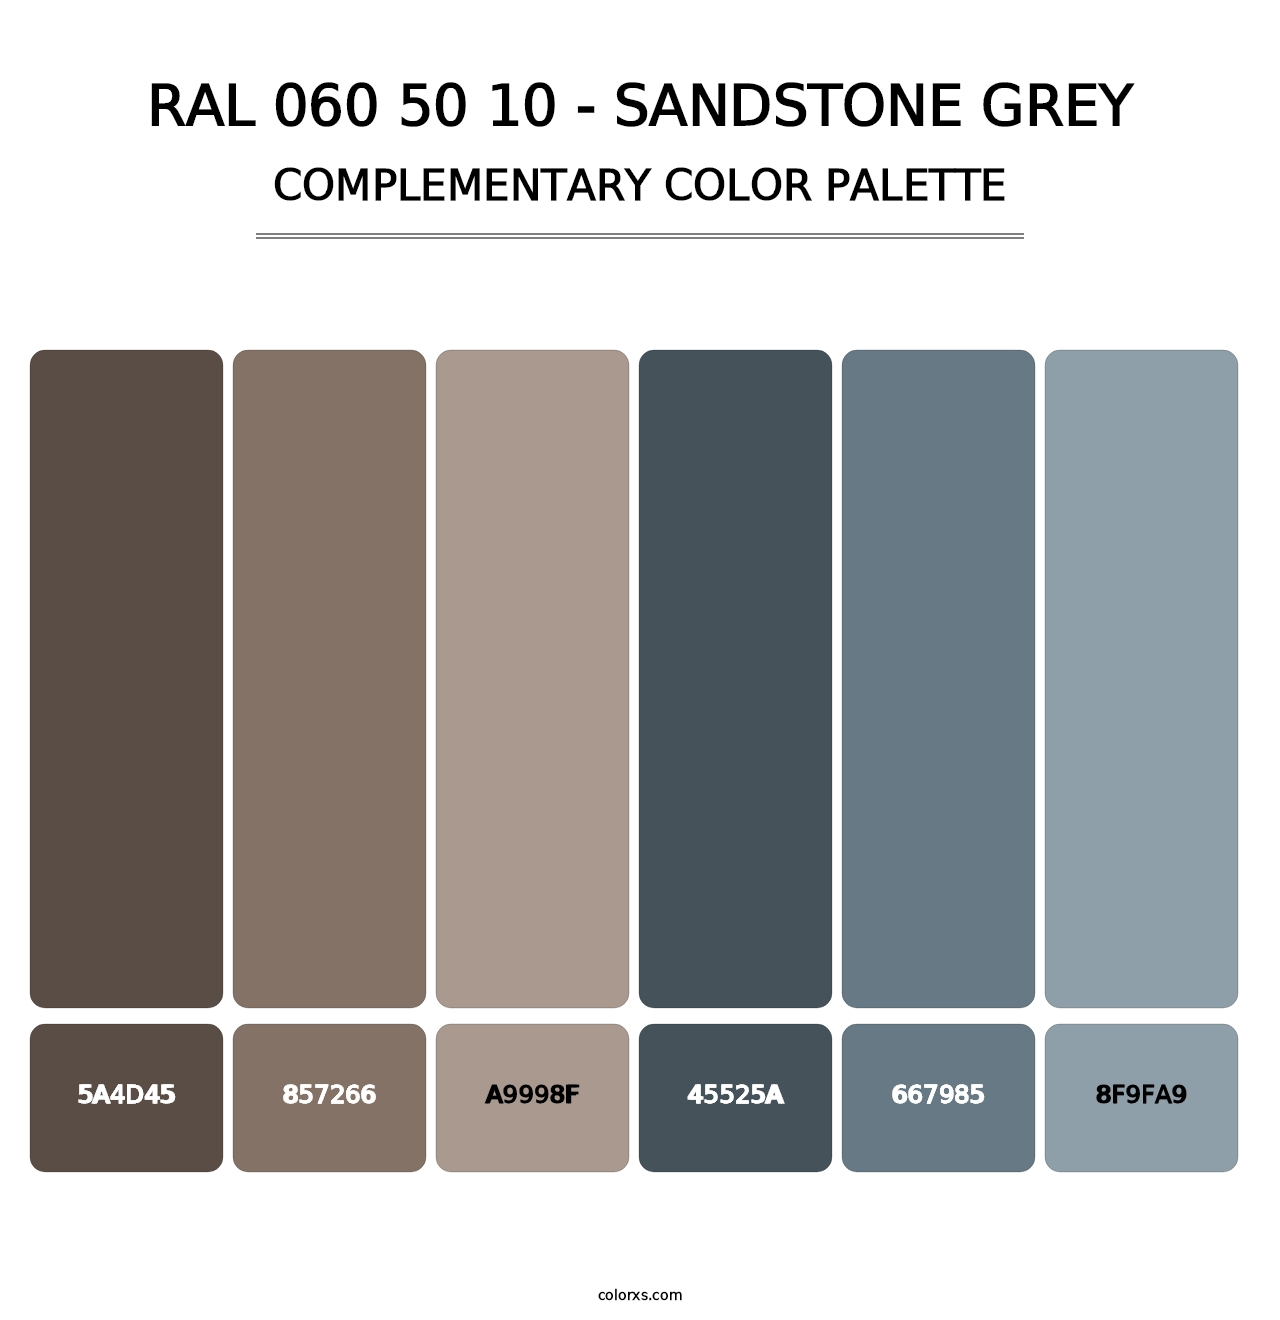 RAL 060 50 10 - Sandstone Grey - Complementary Color Palette